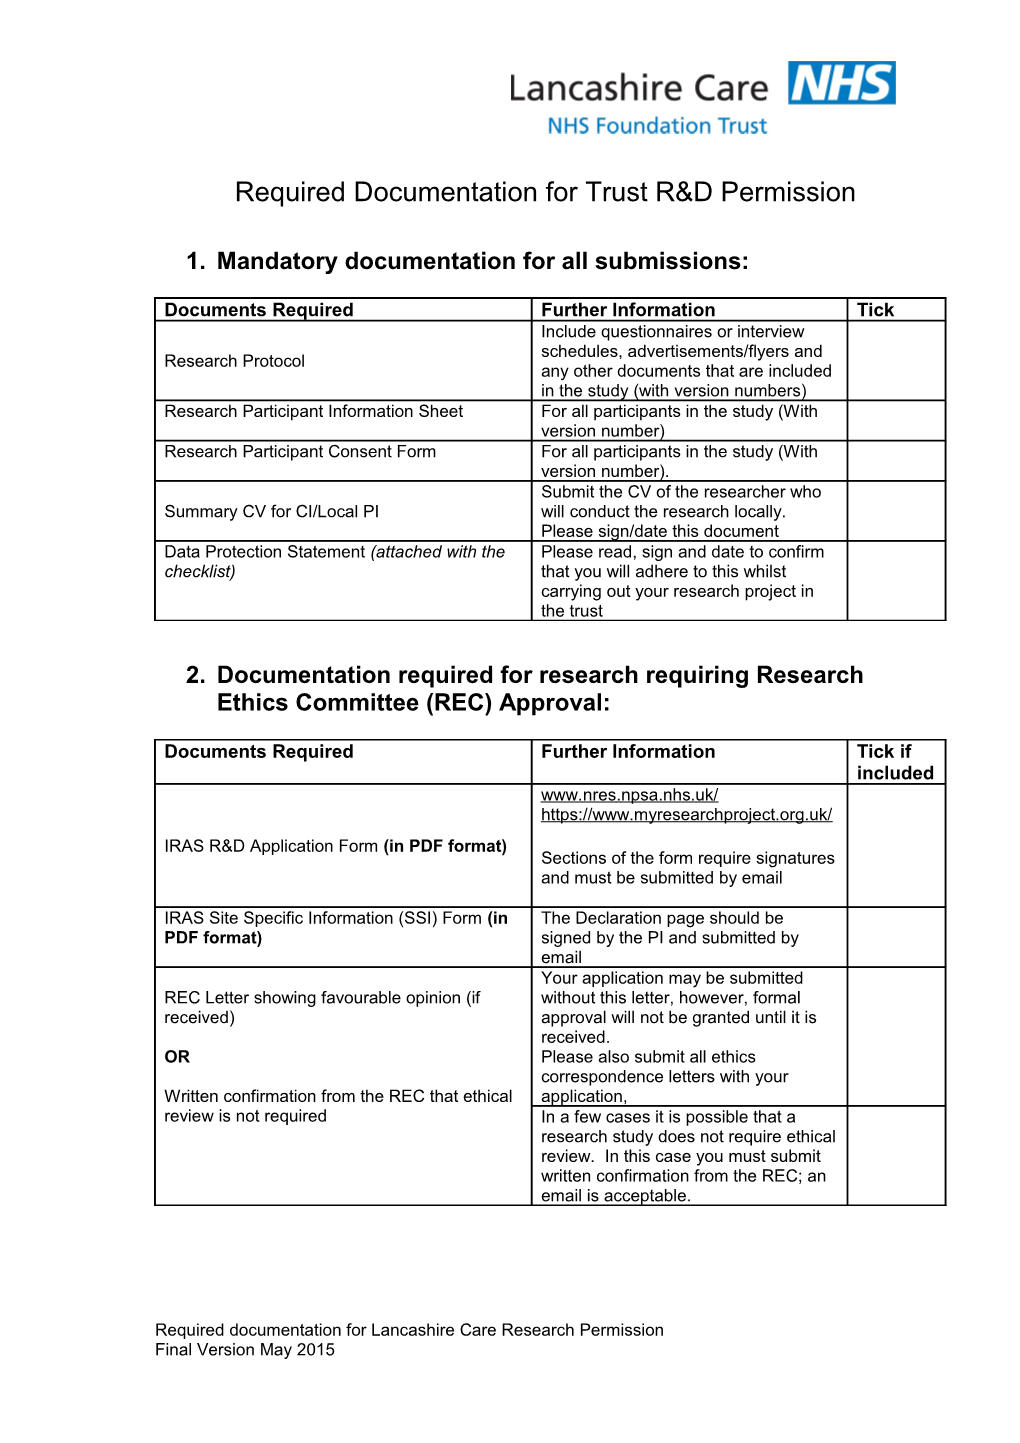 Required Documentation for Trust R&D Approval